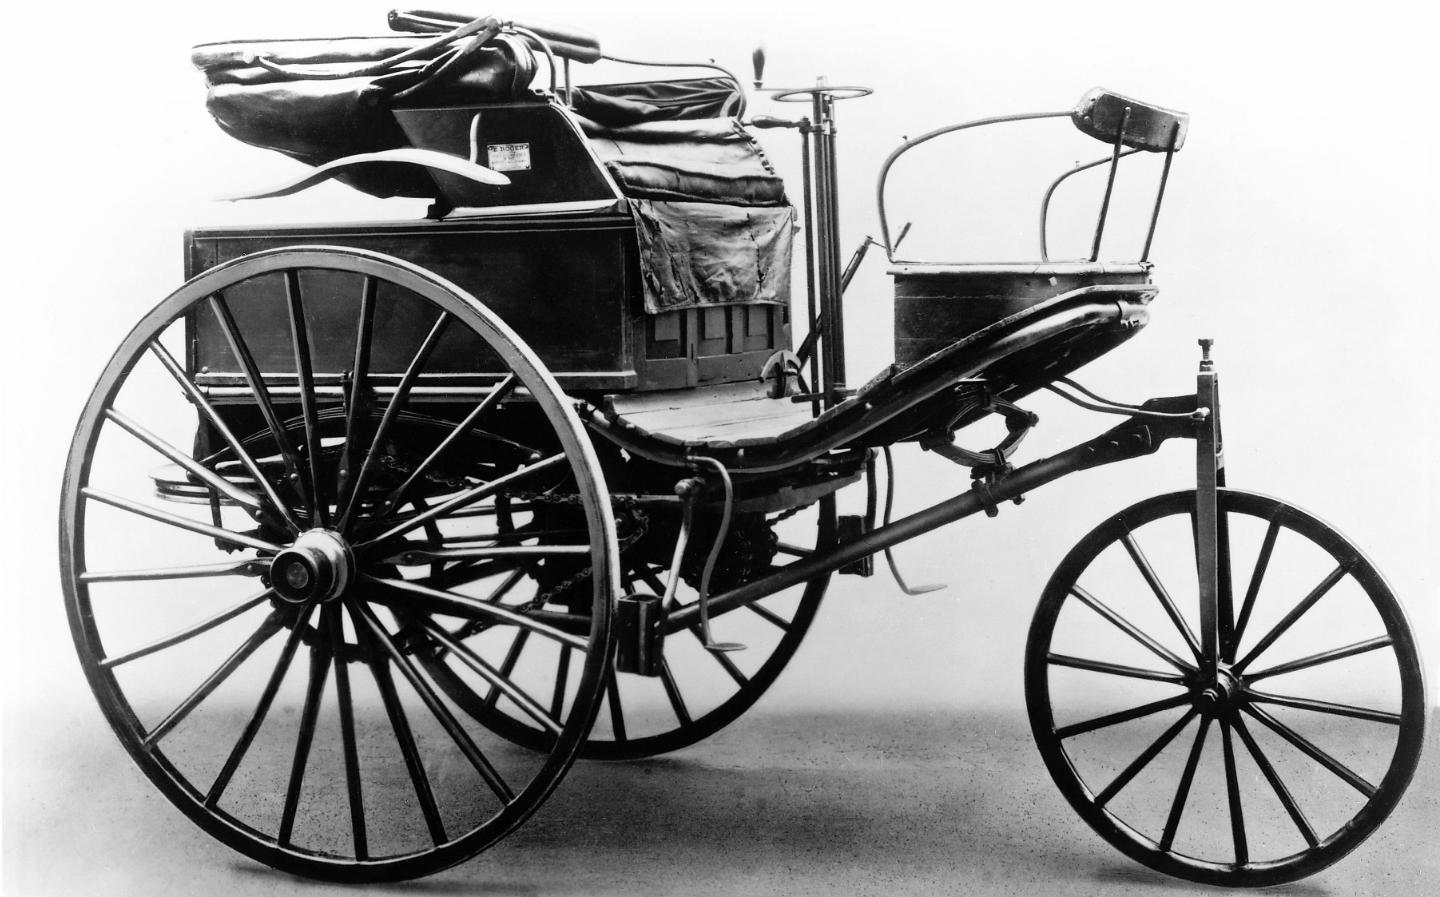 Victoria and Albert Museum will celebrate "the role of the car" in new exhibition